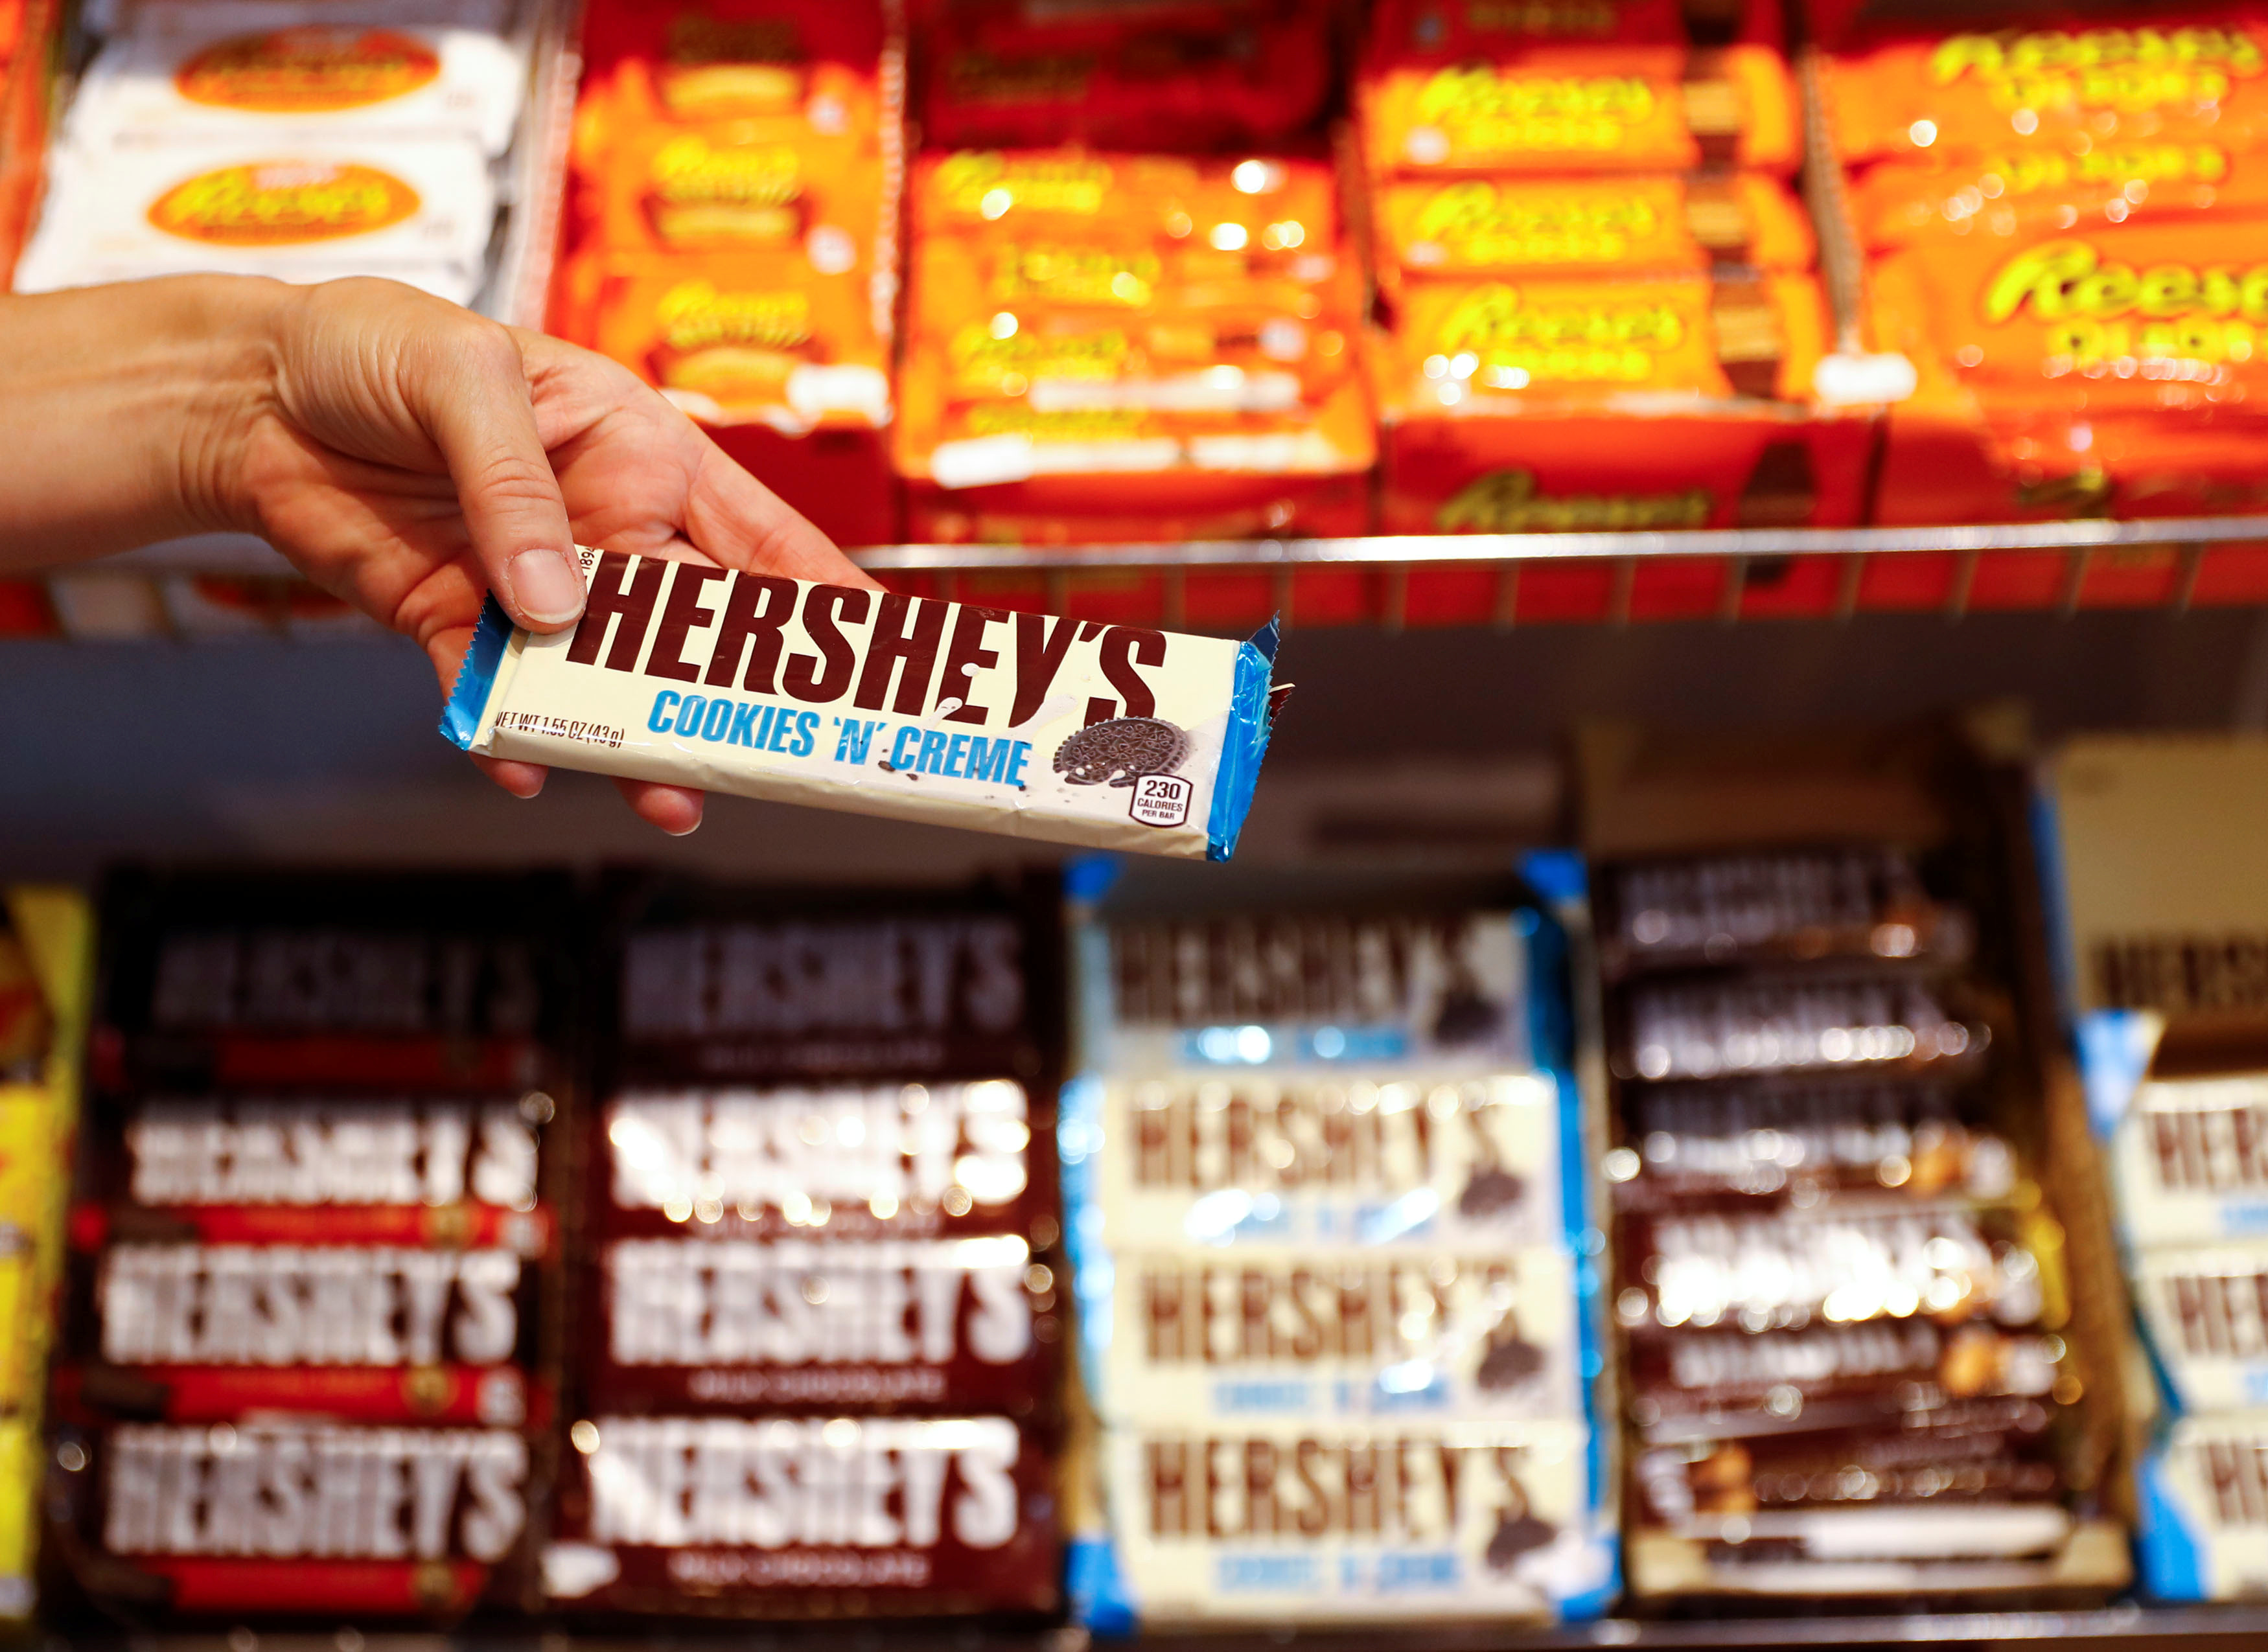 An employee shows a Hershey's chocolate bar made in USA in the "American lifestyle" store in Berlin